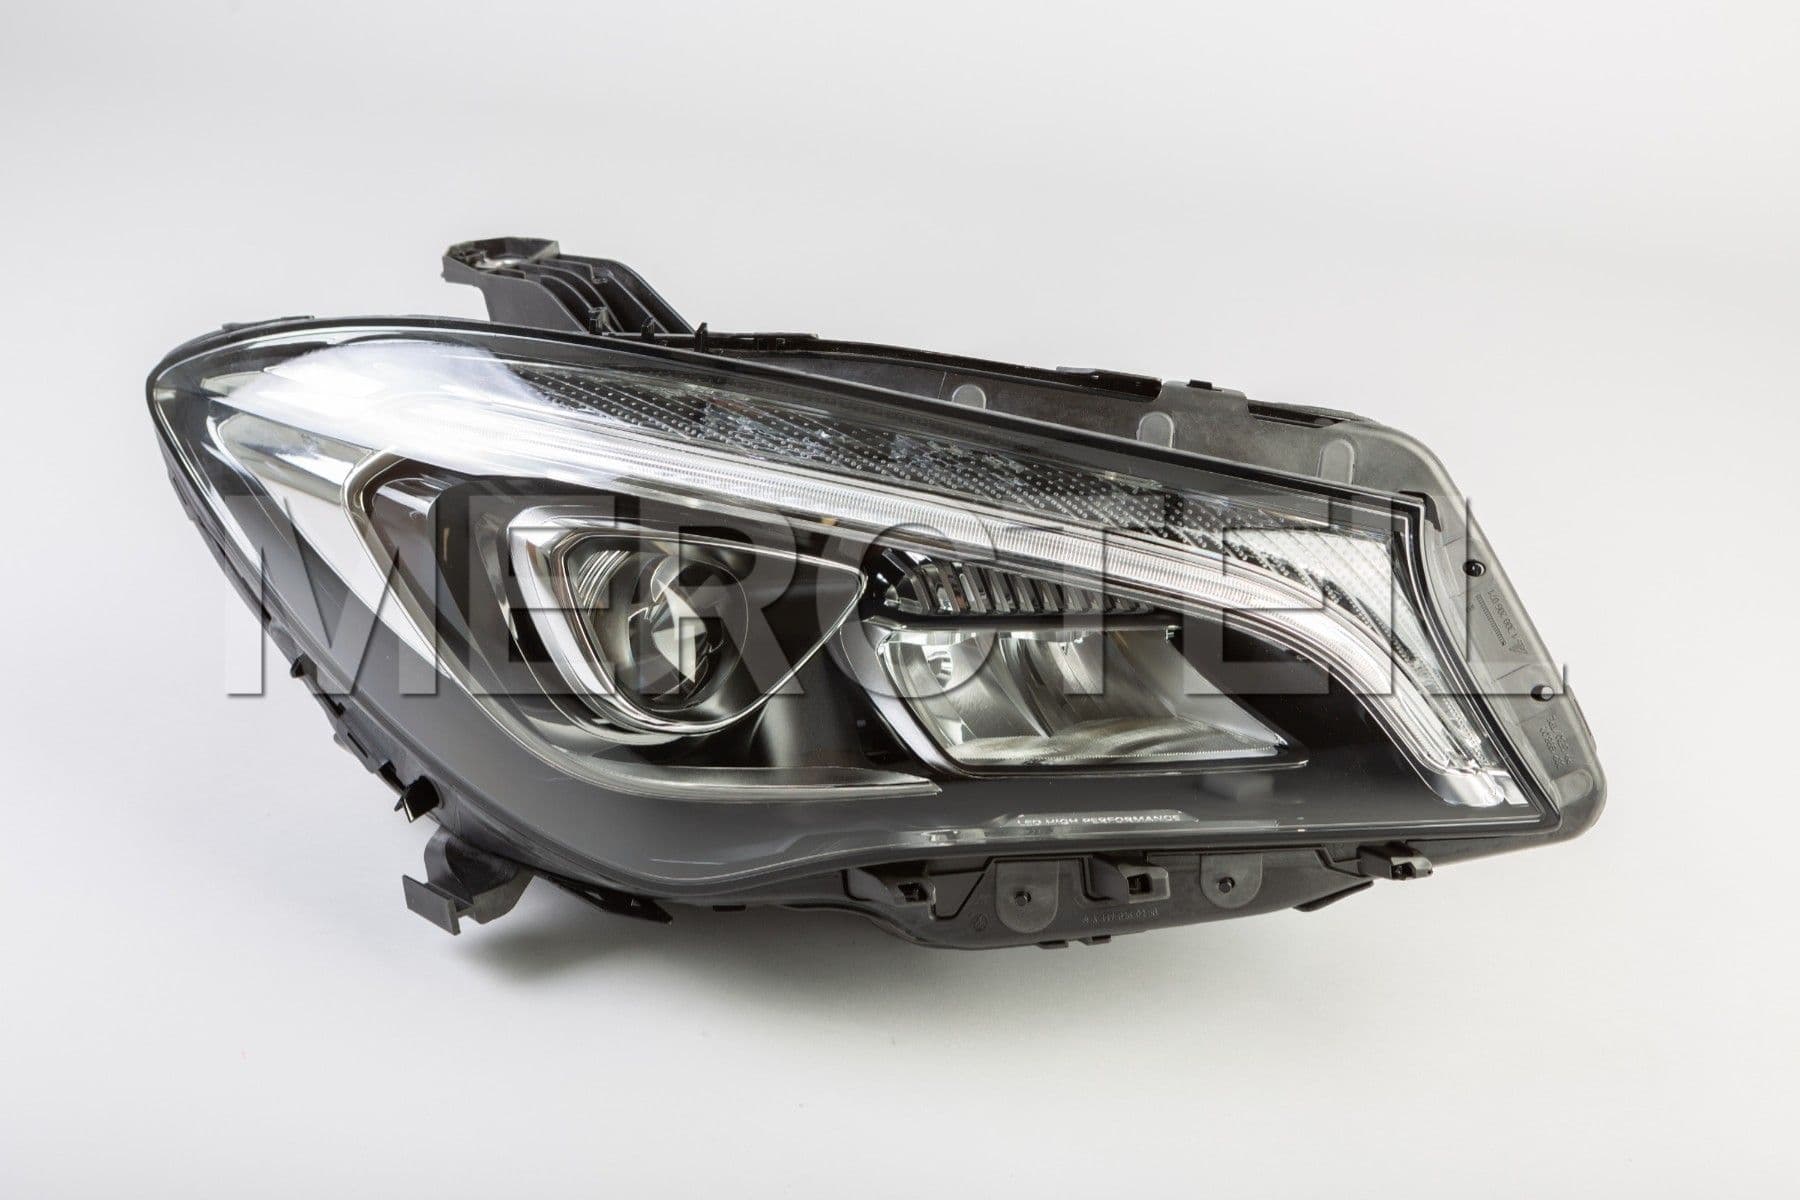 High Performance Dynamic RHD Headlights for CLA-Class (part number: 	
A1179069900)